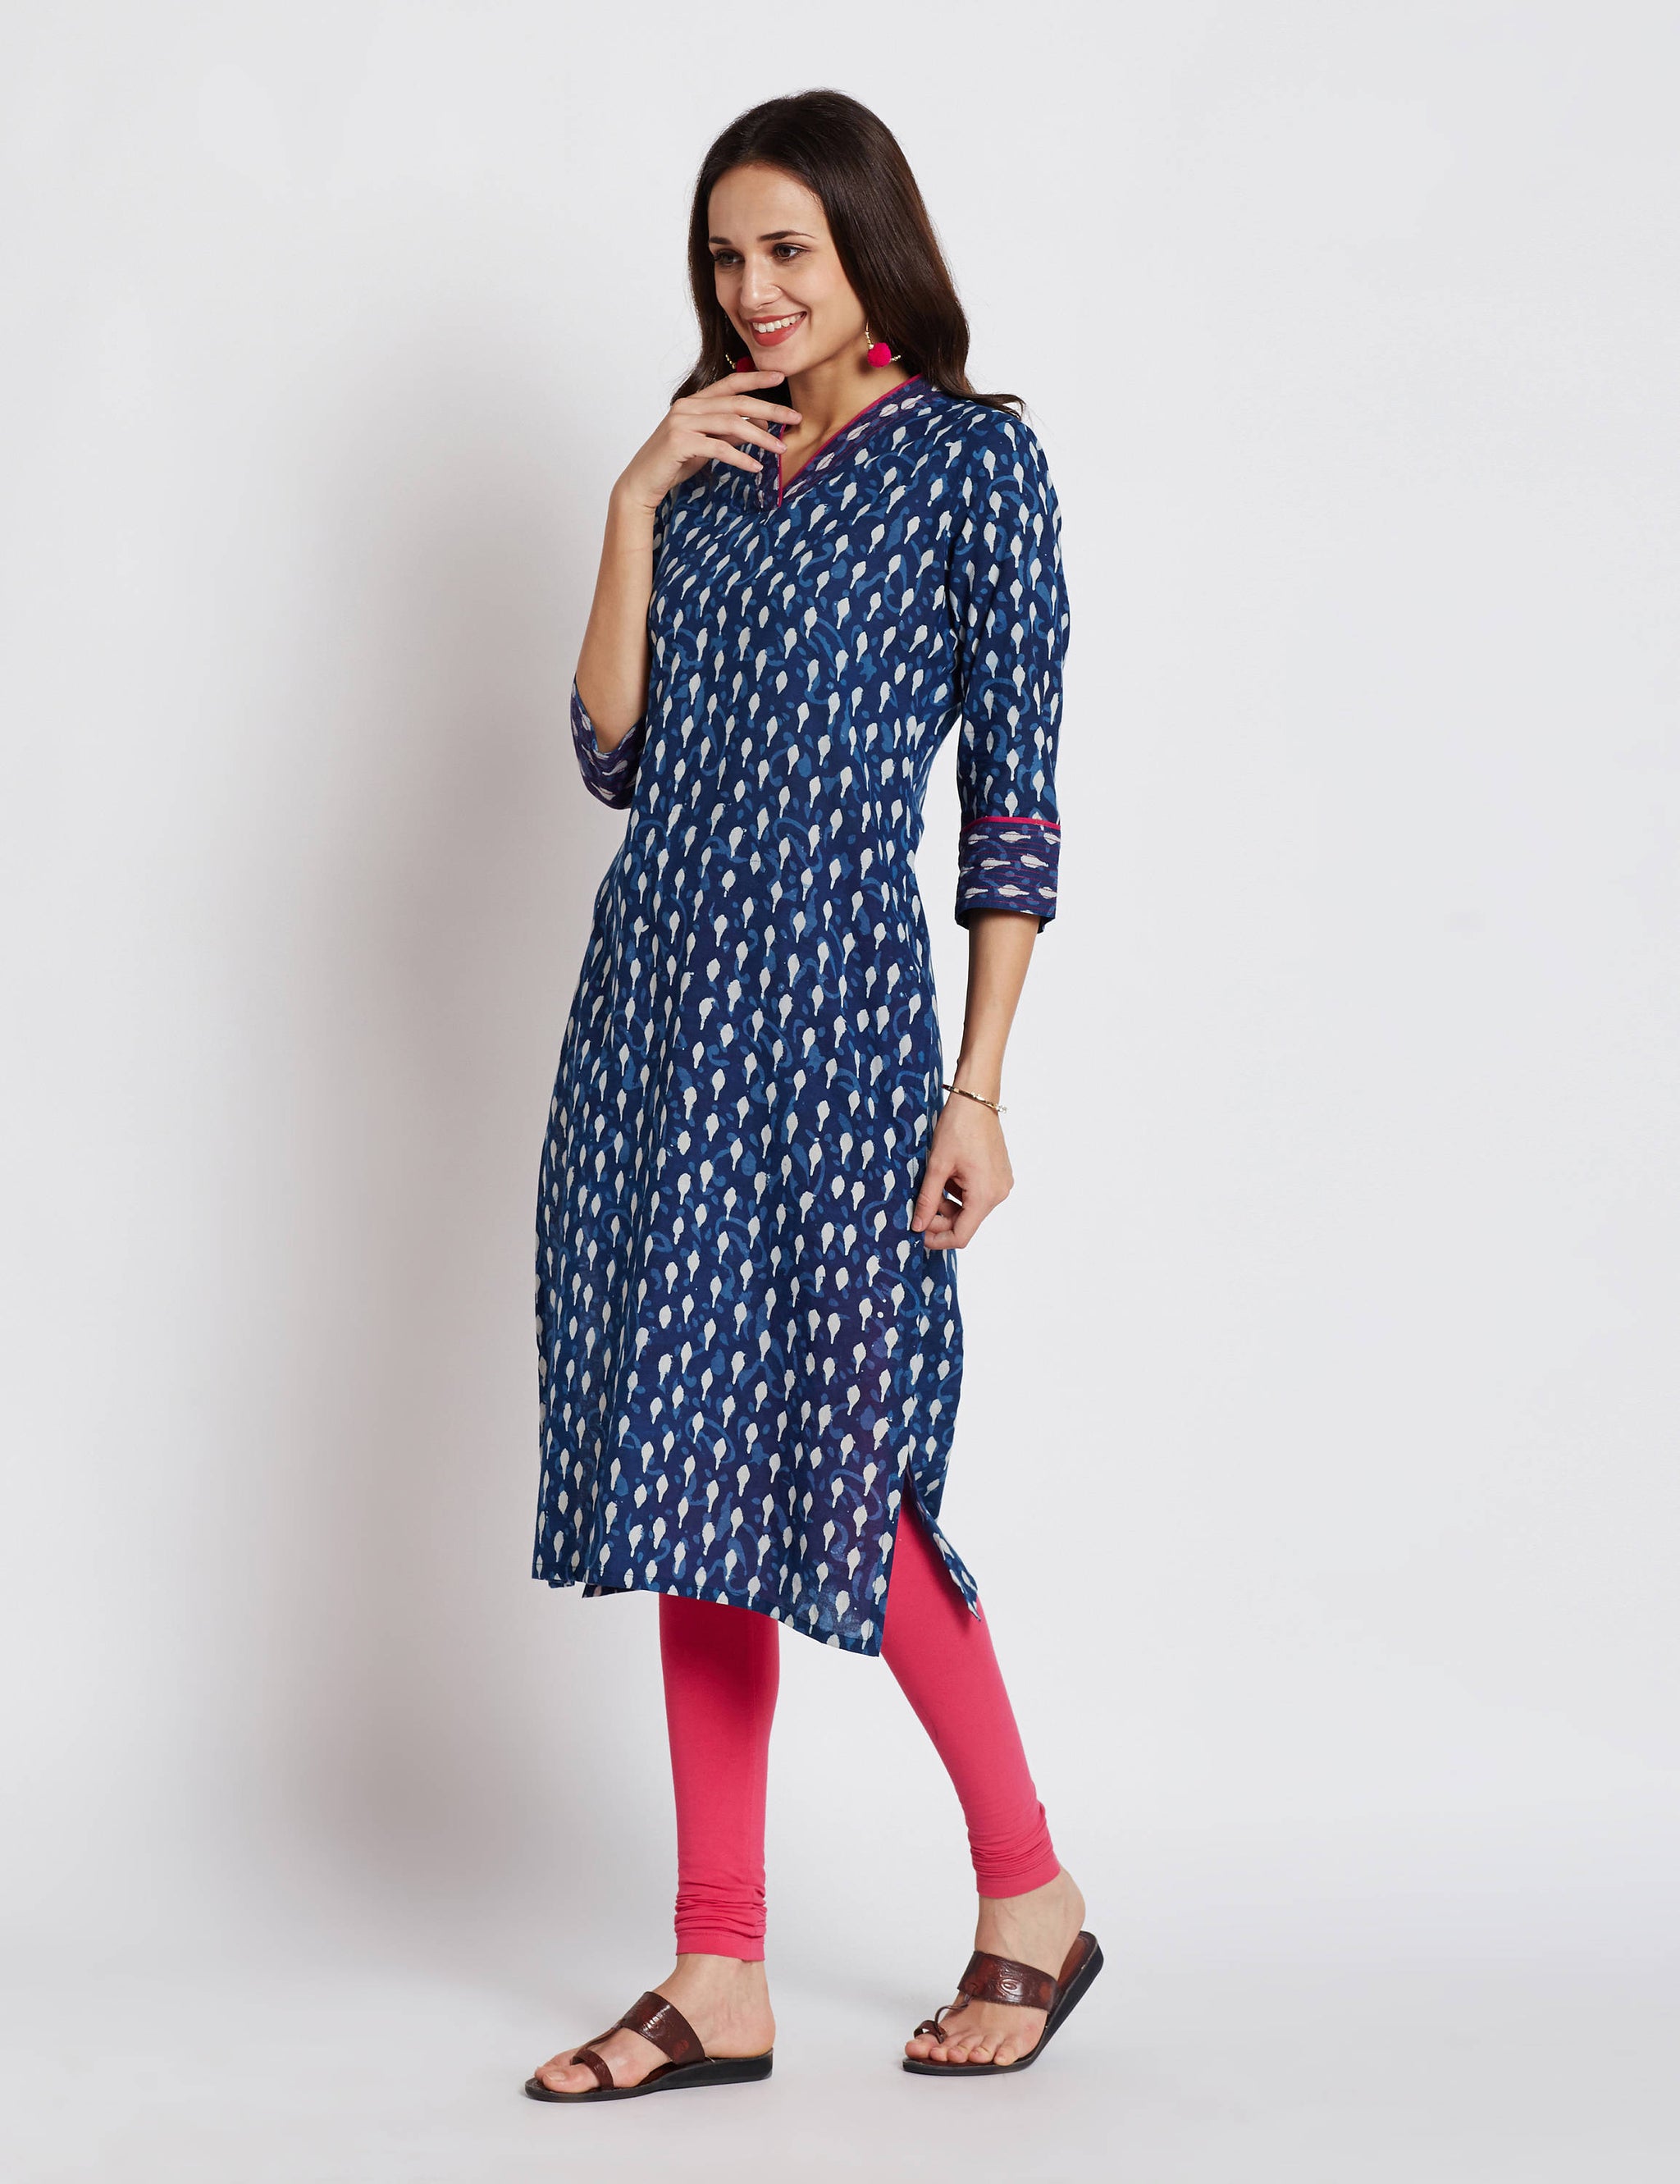 Indigo Hand block dabu printed ethnic long Indian kurta with contrast trims and hot pink hand embroidery on V neck and sleeves